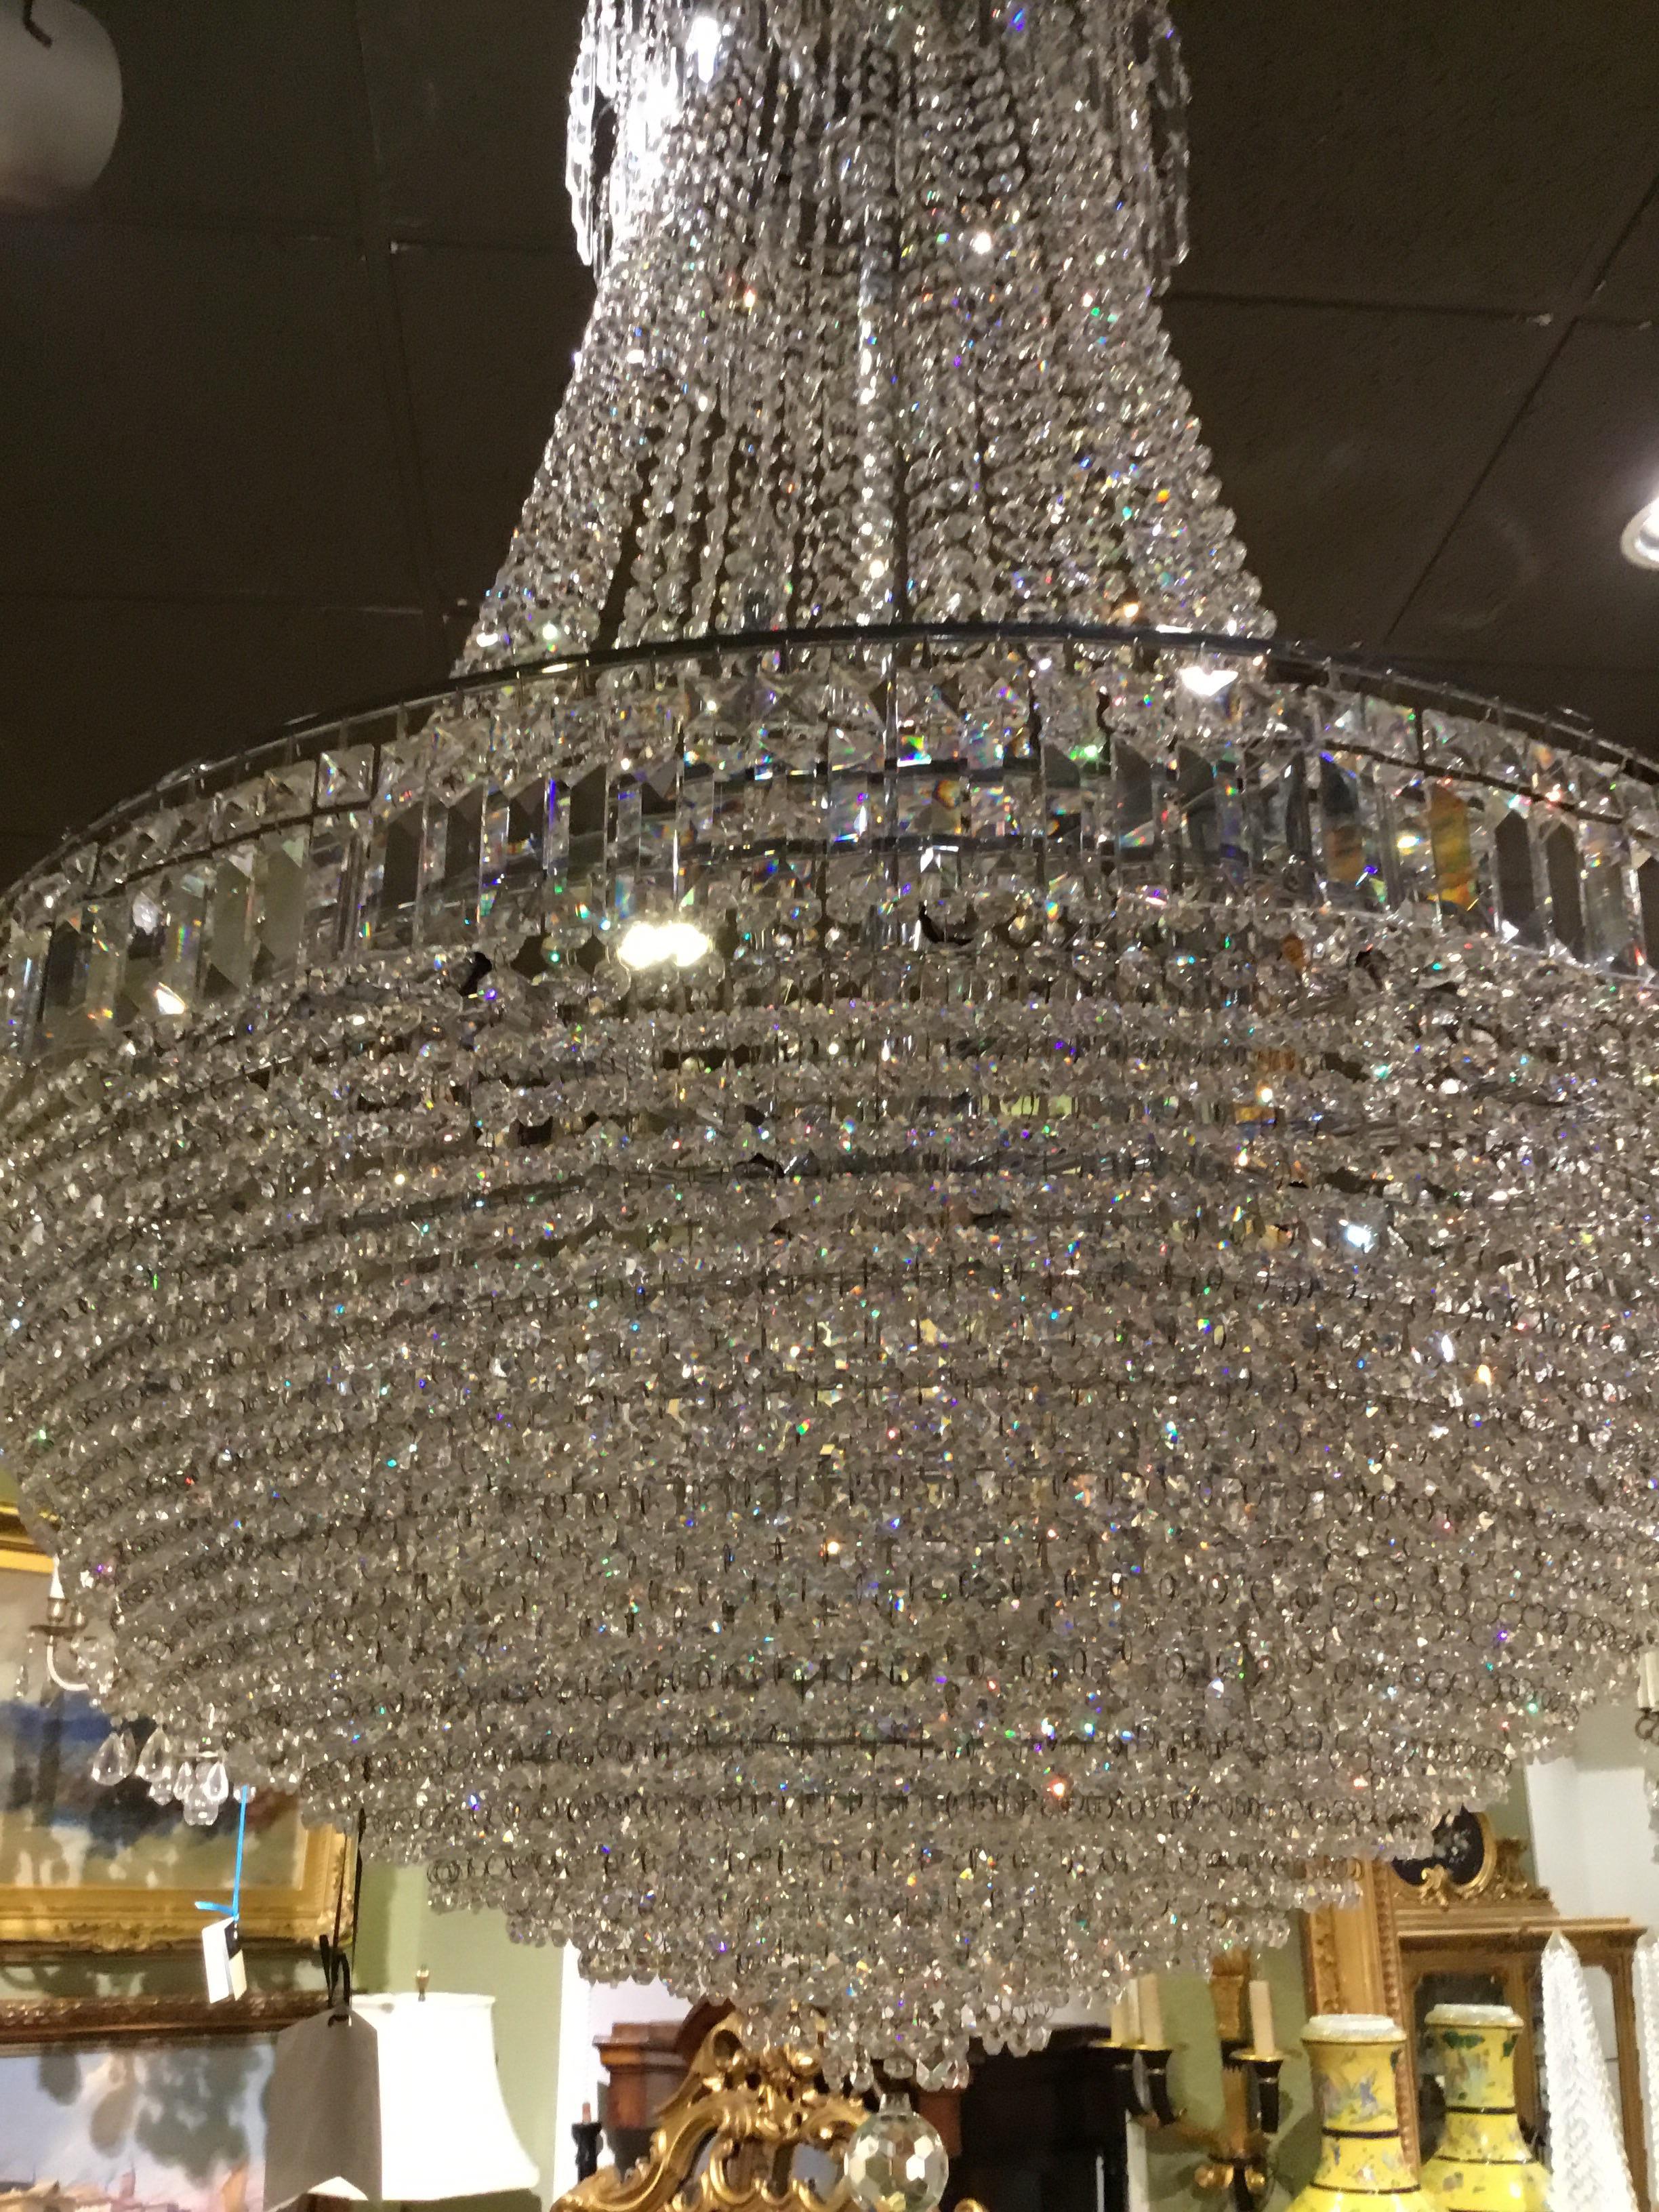 Straus crystal chandelier with very large spray of lights
which reflects great color. Multiple layers of lights in several
Directions that make this piece really sparkle 